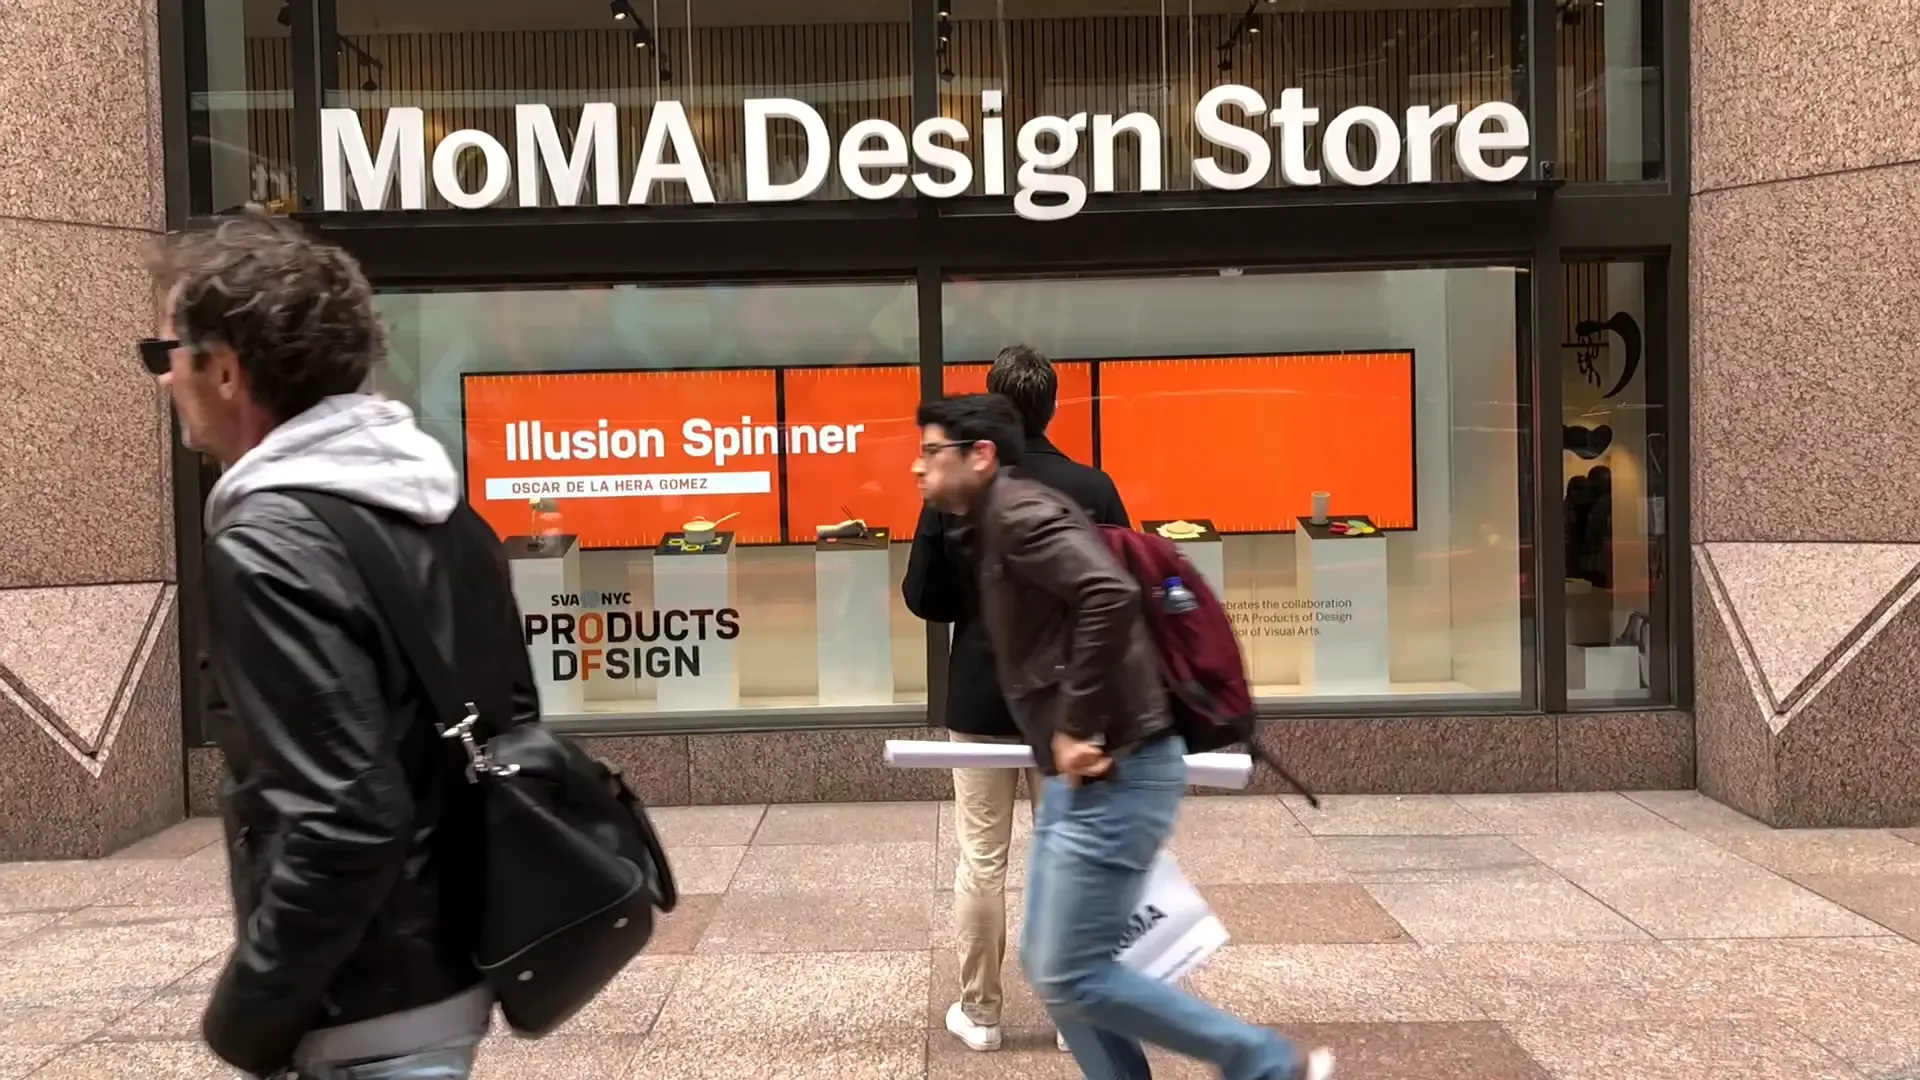 The Illusion Spinner as featured on the front windows of the Midtown Manhattan MoMA Design Store.